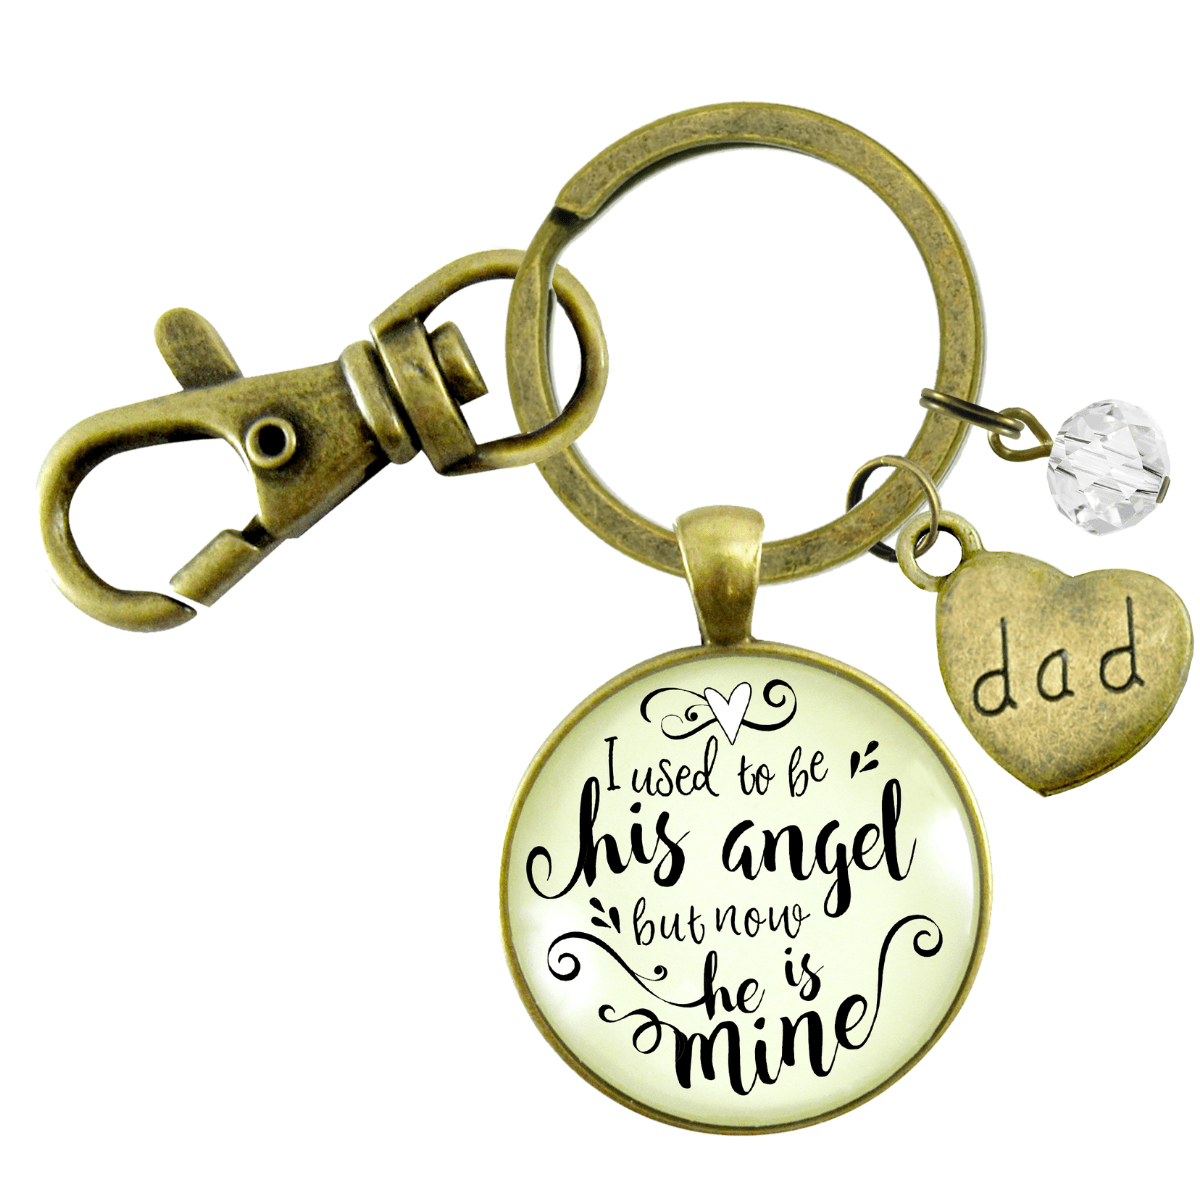 Dad Remembrance Keychain I Used To Be His Angel Heaven Memorial Jewelry Condolence Gift - Gutsy Goodness